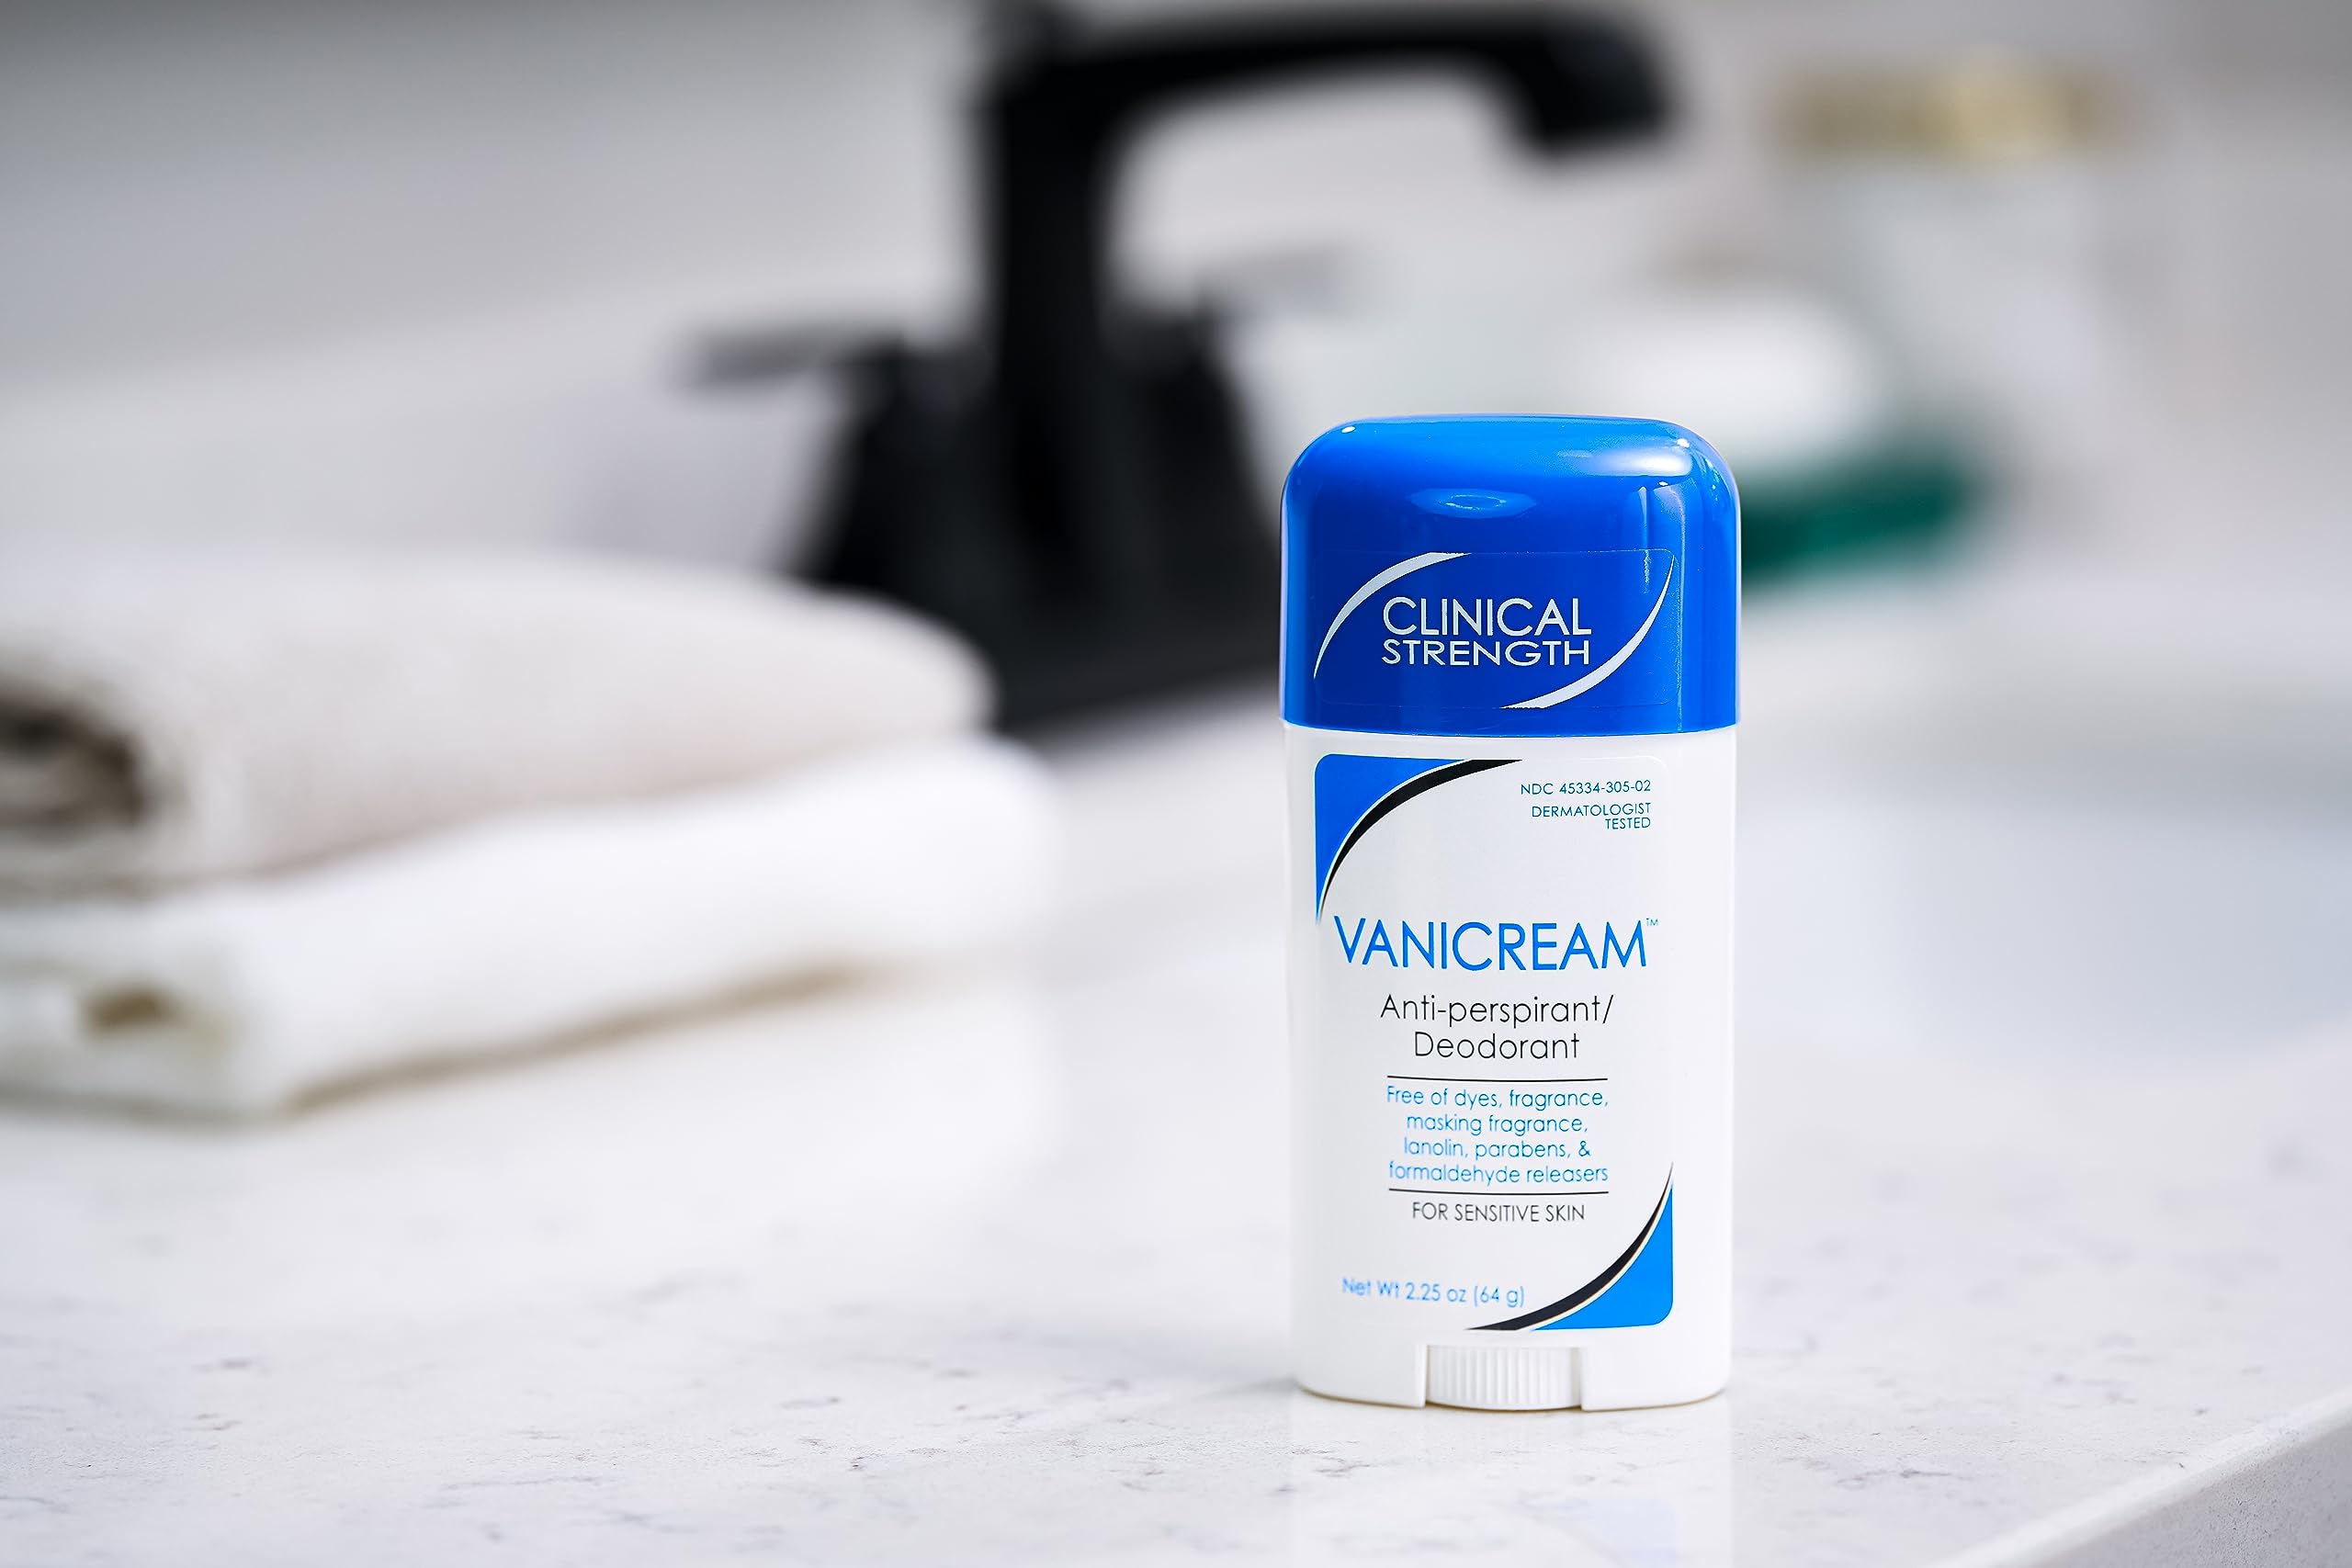 Vanicream Anti-Perspirant Deodorant for Sensitive Skin - 2.25 oz - Clinical-Strength Deodorant with 24-Hour Protection - Unscented